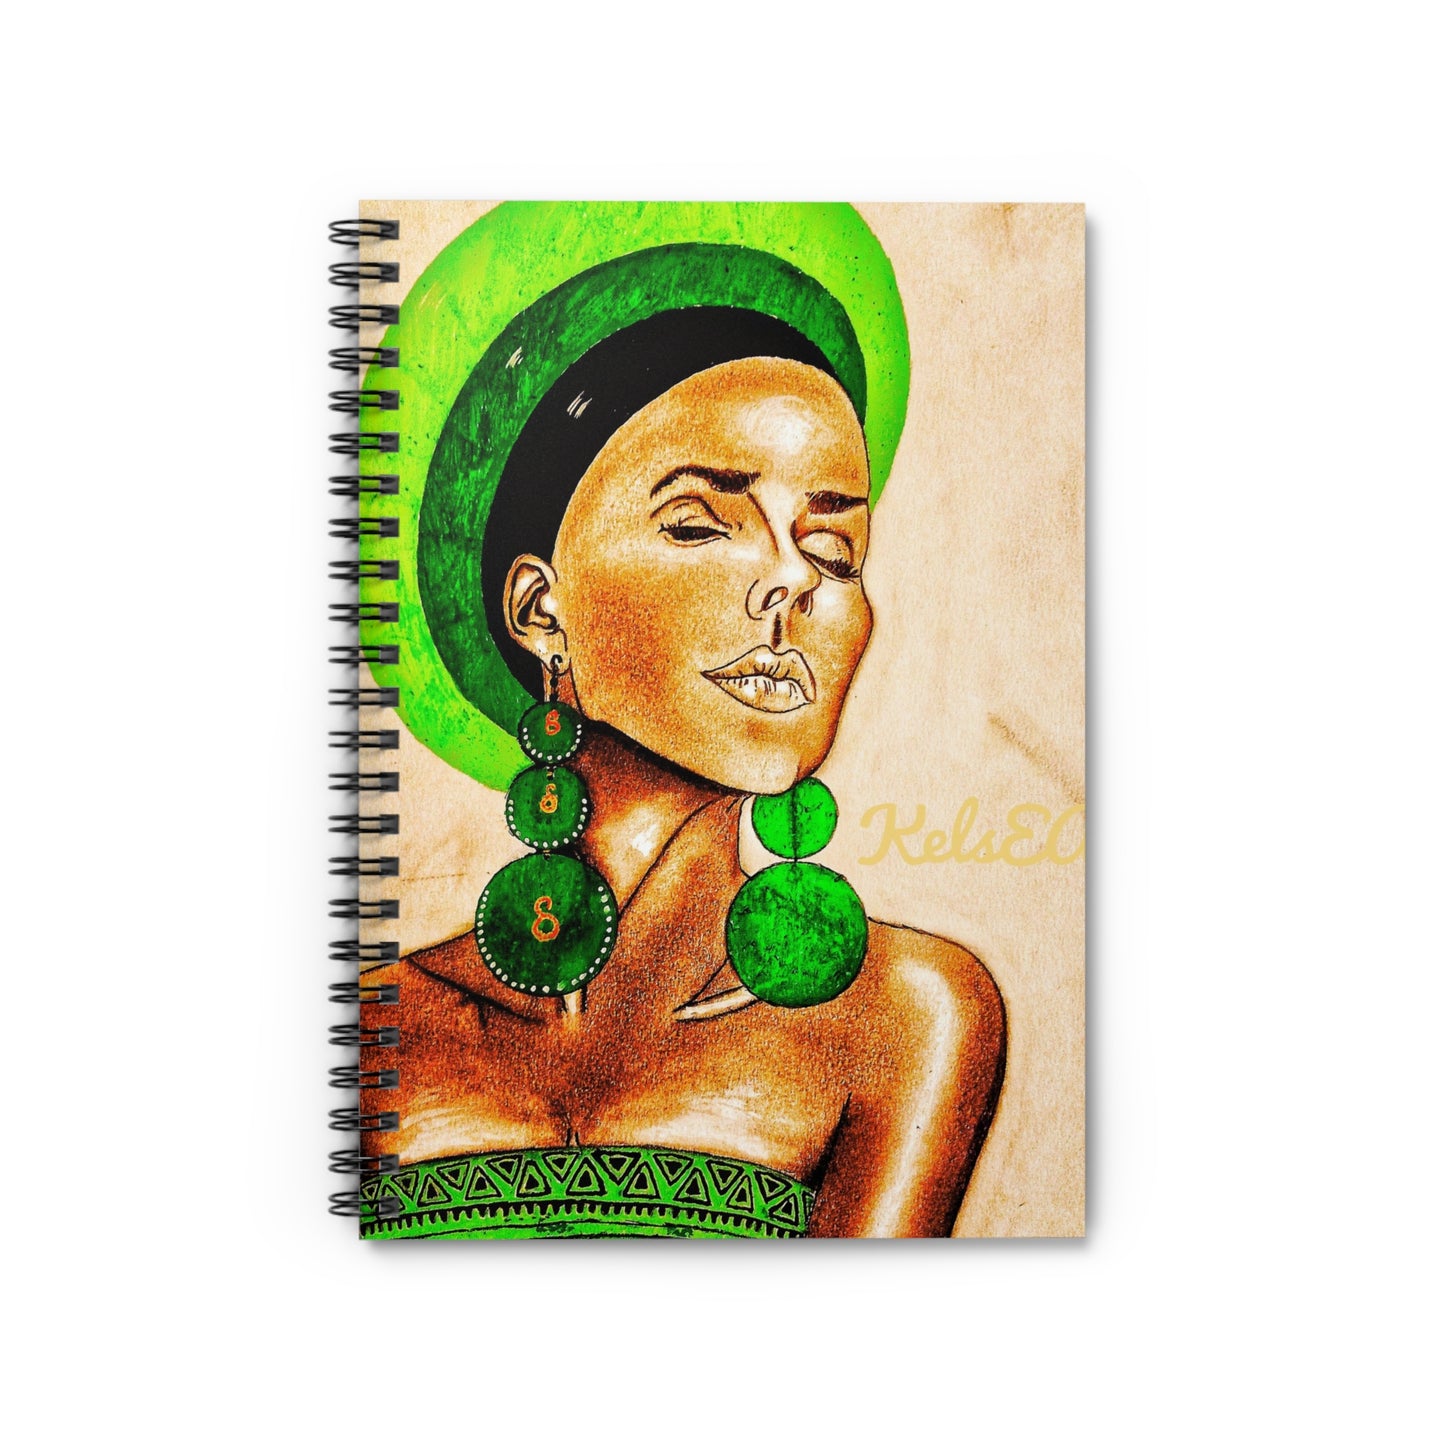 Lime Green Spiral Notebook - Ruled Line